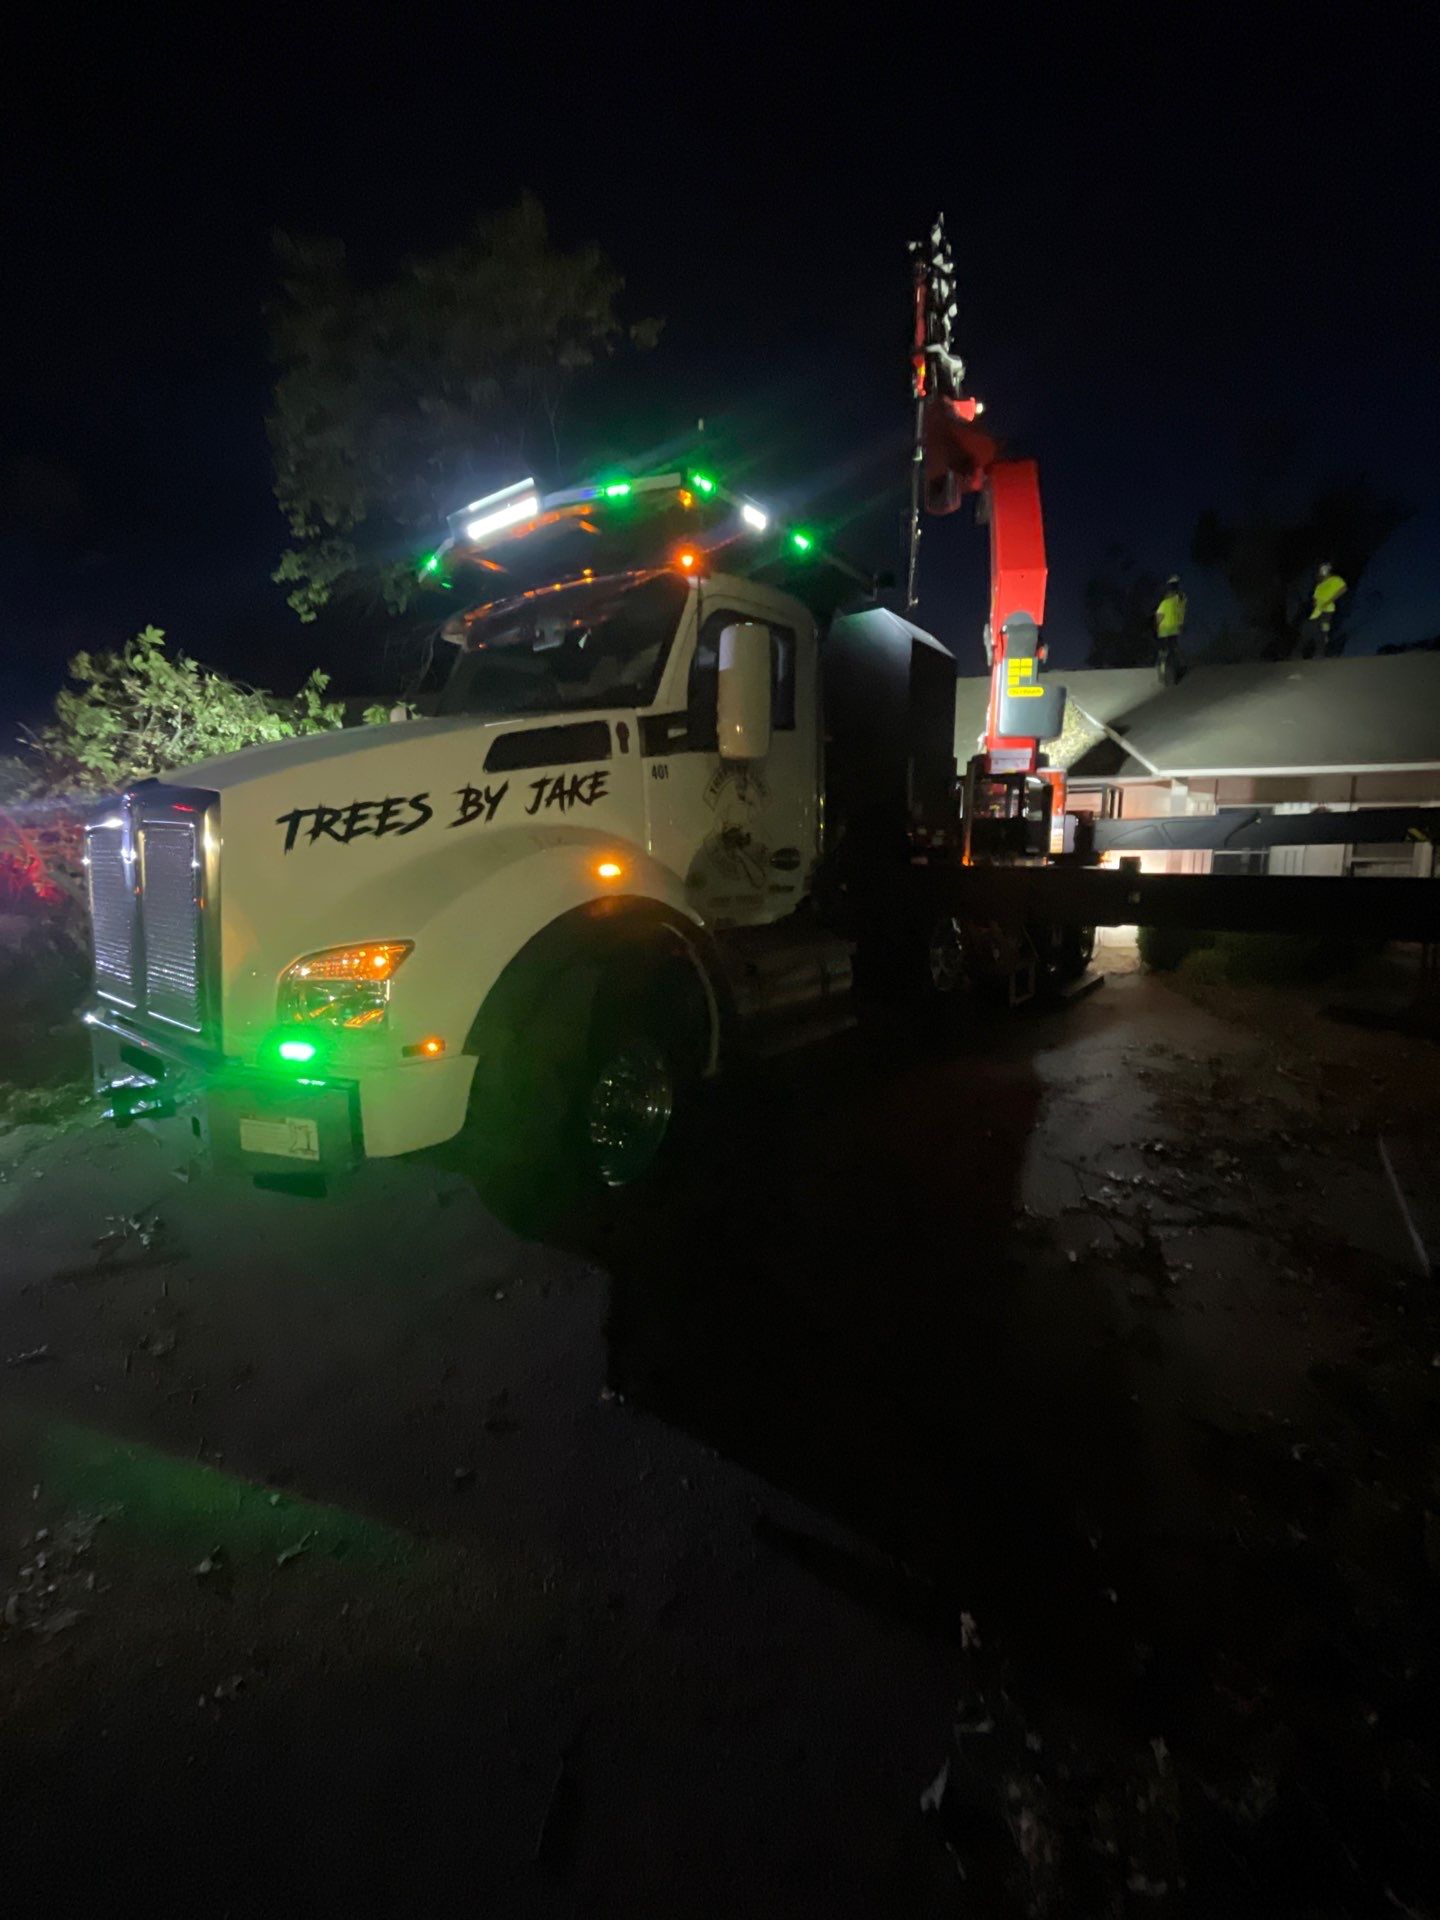 A truck labeled "Trees by Jake" with bright lights illuminates a driveway at night. Workers with a crane are managing tree branches on the roof of a nearby building.